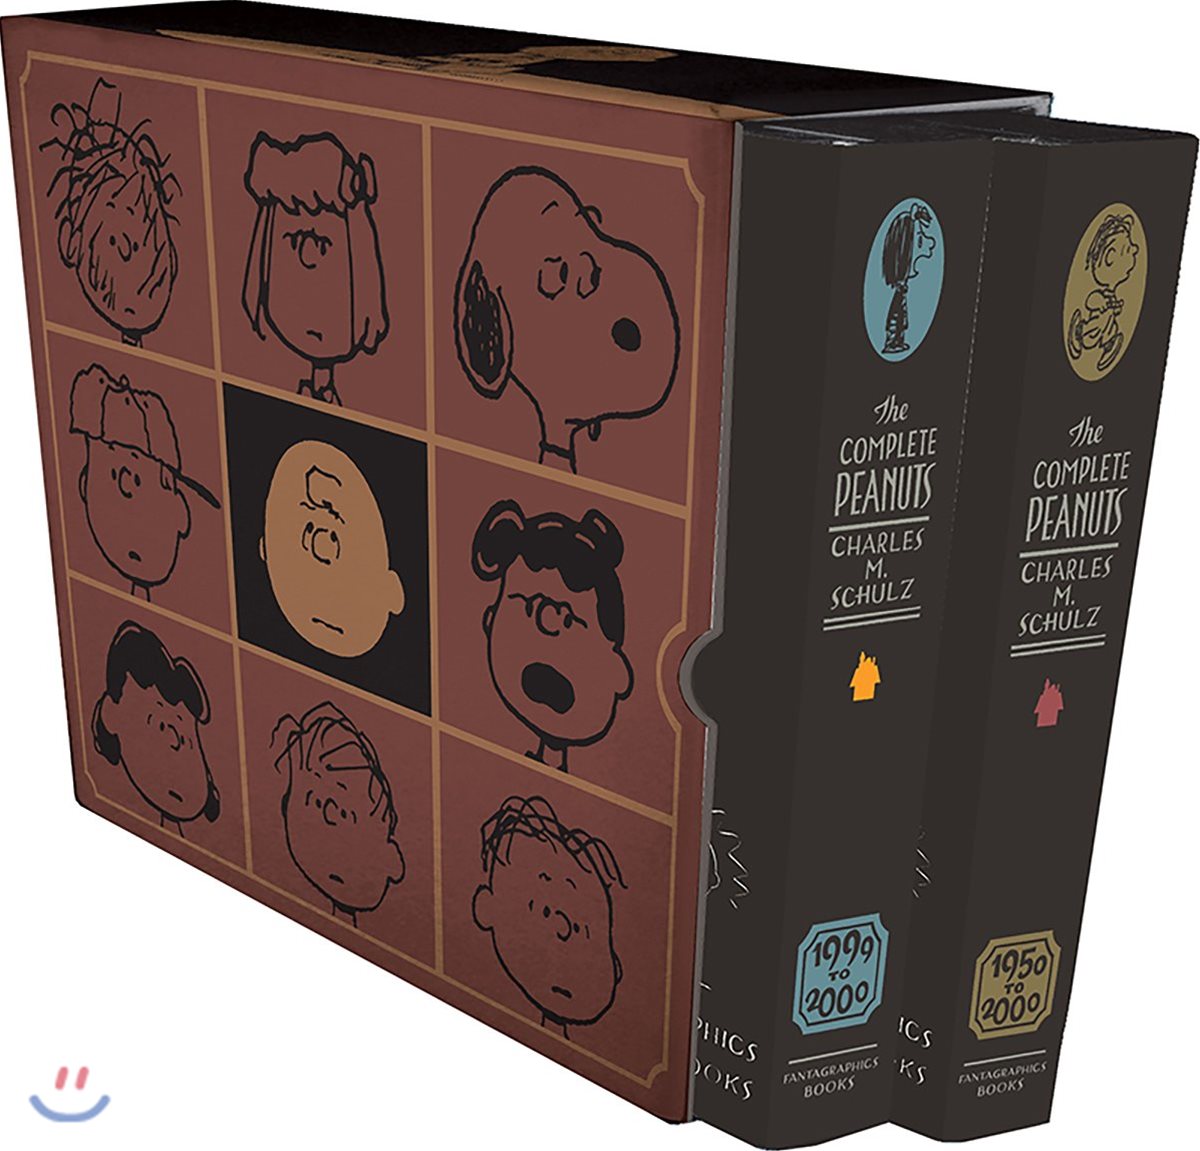 The Complete Peanuts: 1999-2000 and Comics & Stories Gift Box Set (Vol. 25 & 26)